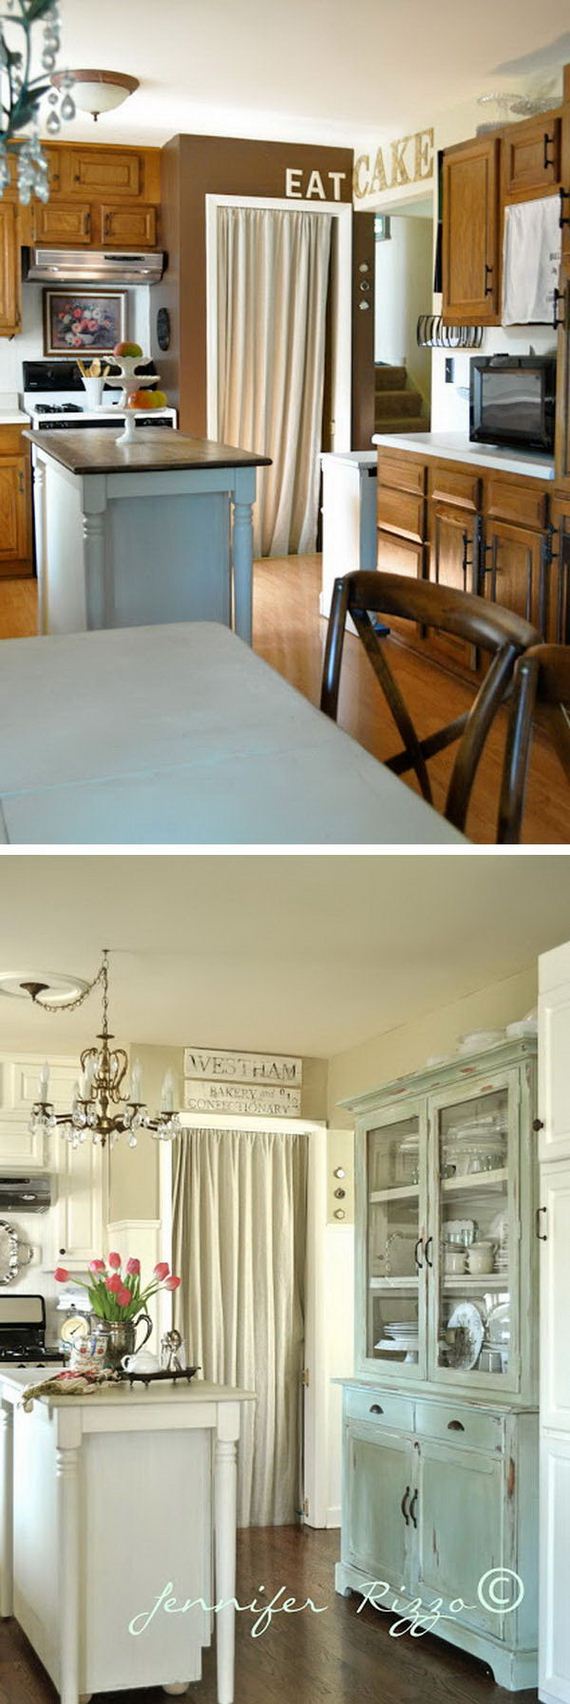 13-before-after-kitchen-makeover